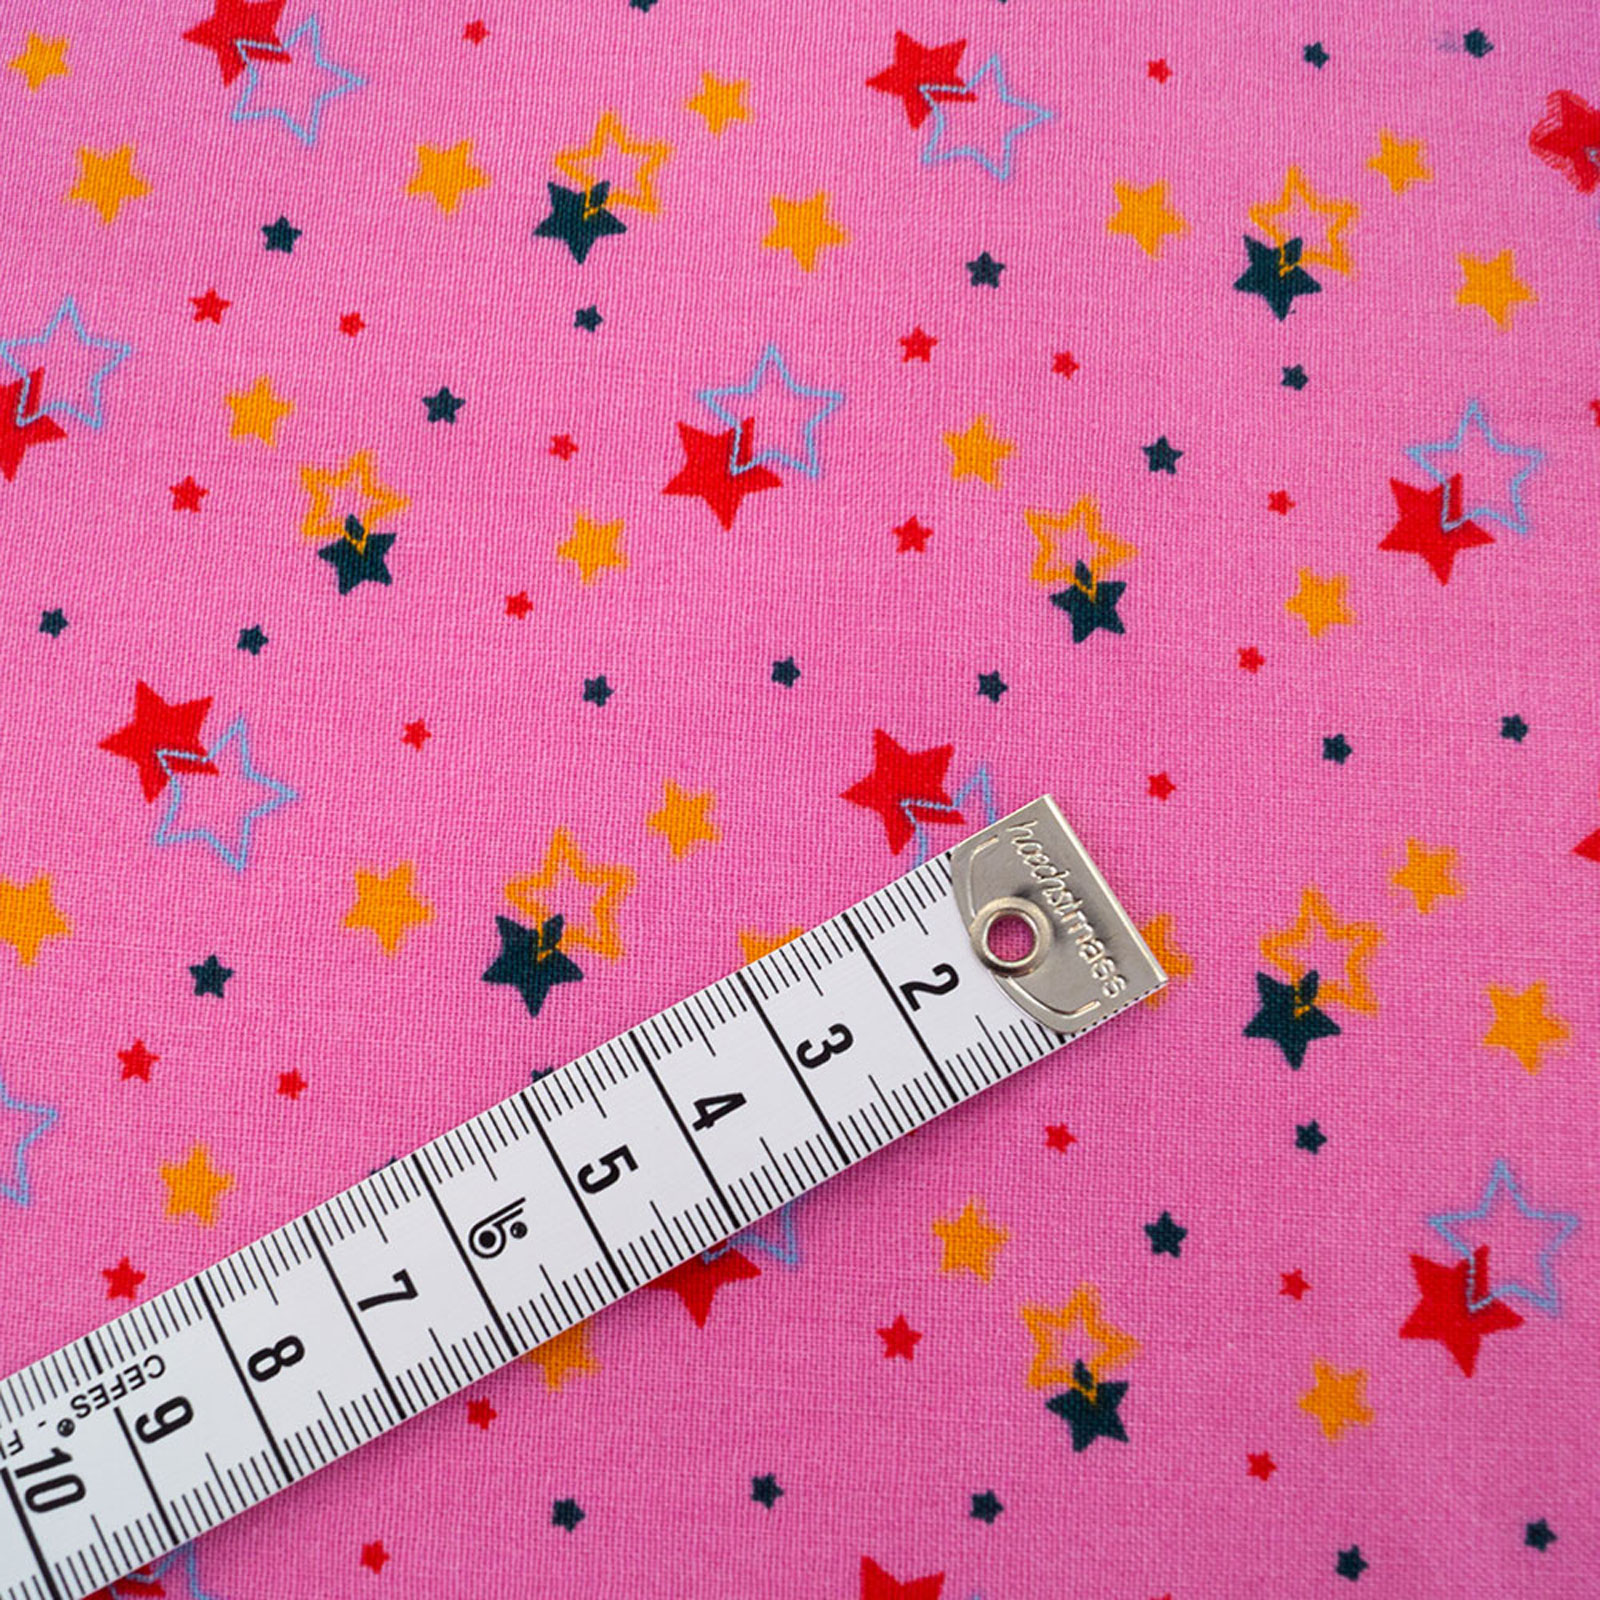 Cotton fabric - Starry sky pink